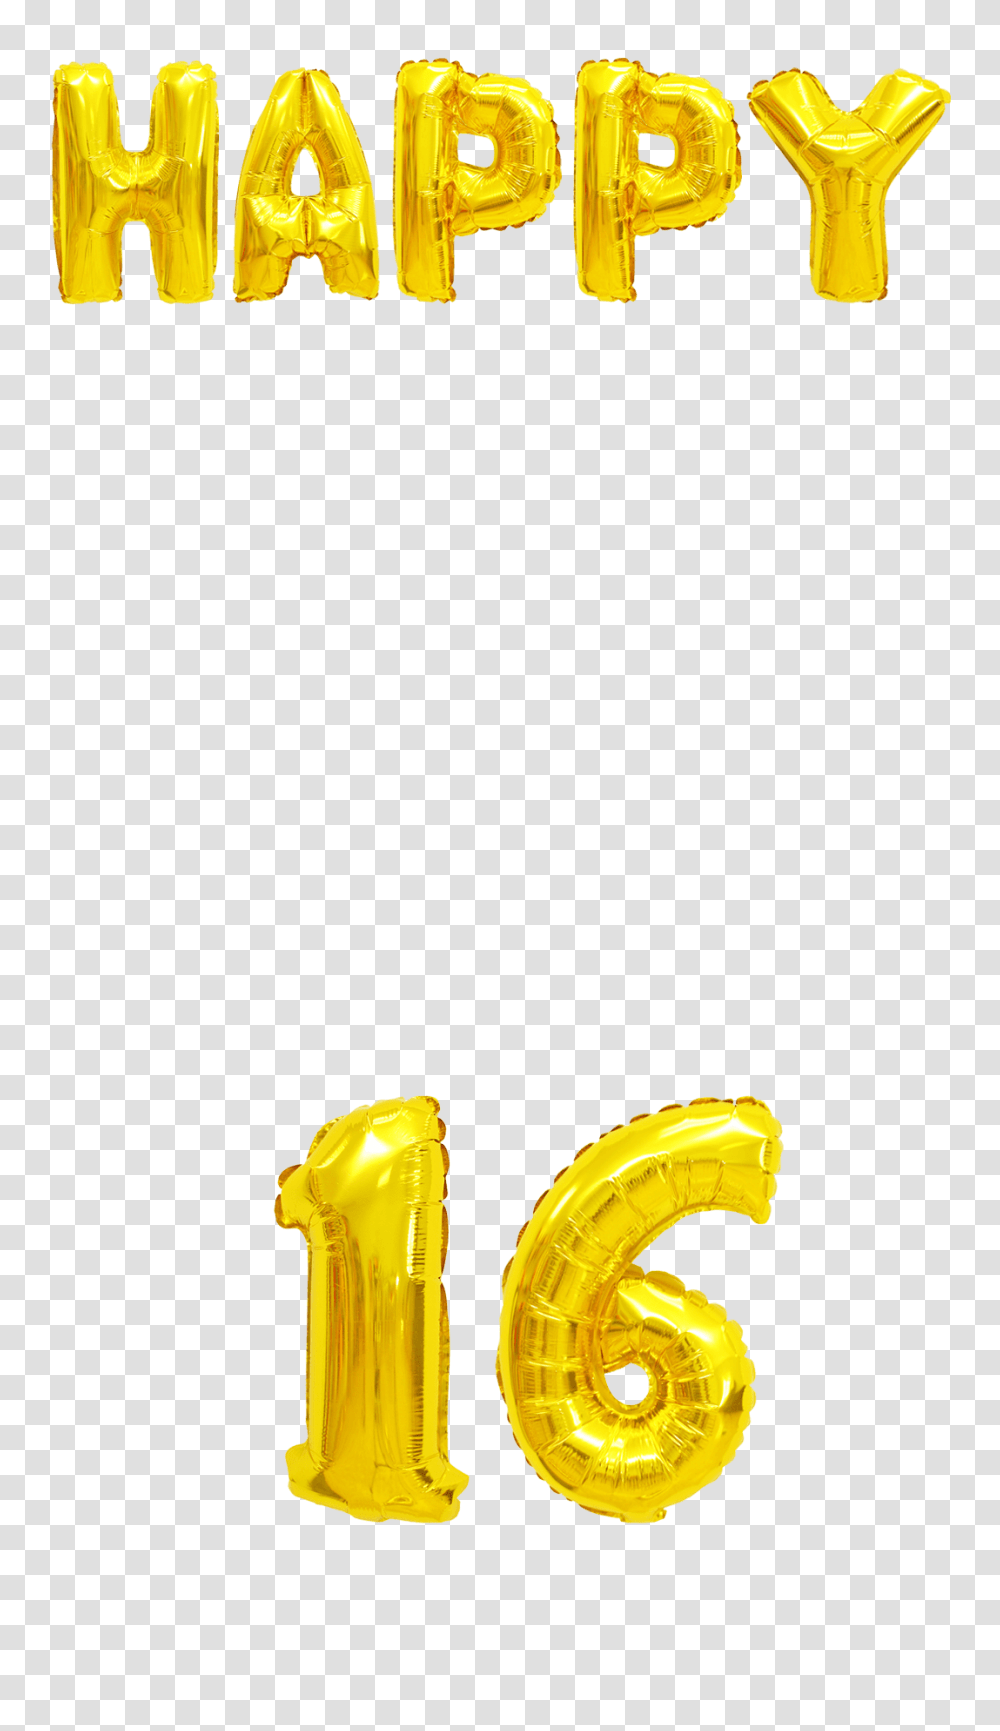 Sweet Gold Balloons Birthday Snapchat Filter Geofilter Maker, Plant, Food, Apparel Transparent Png